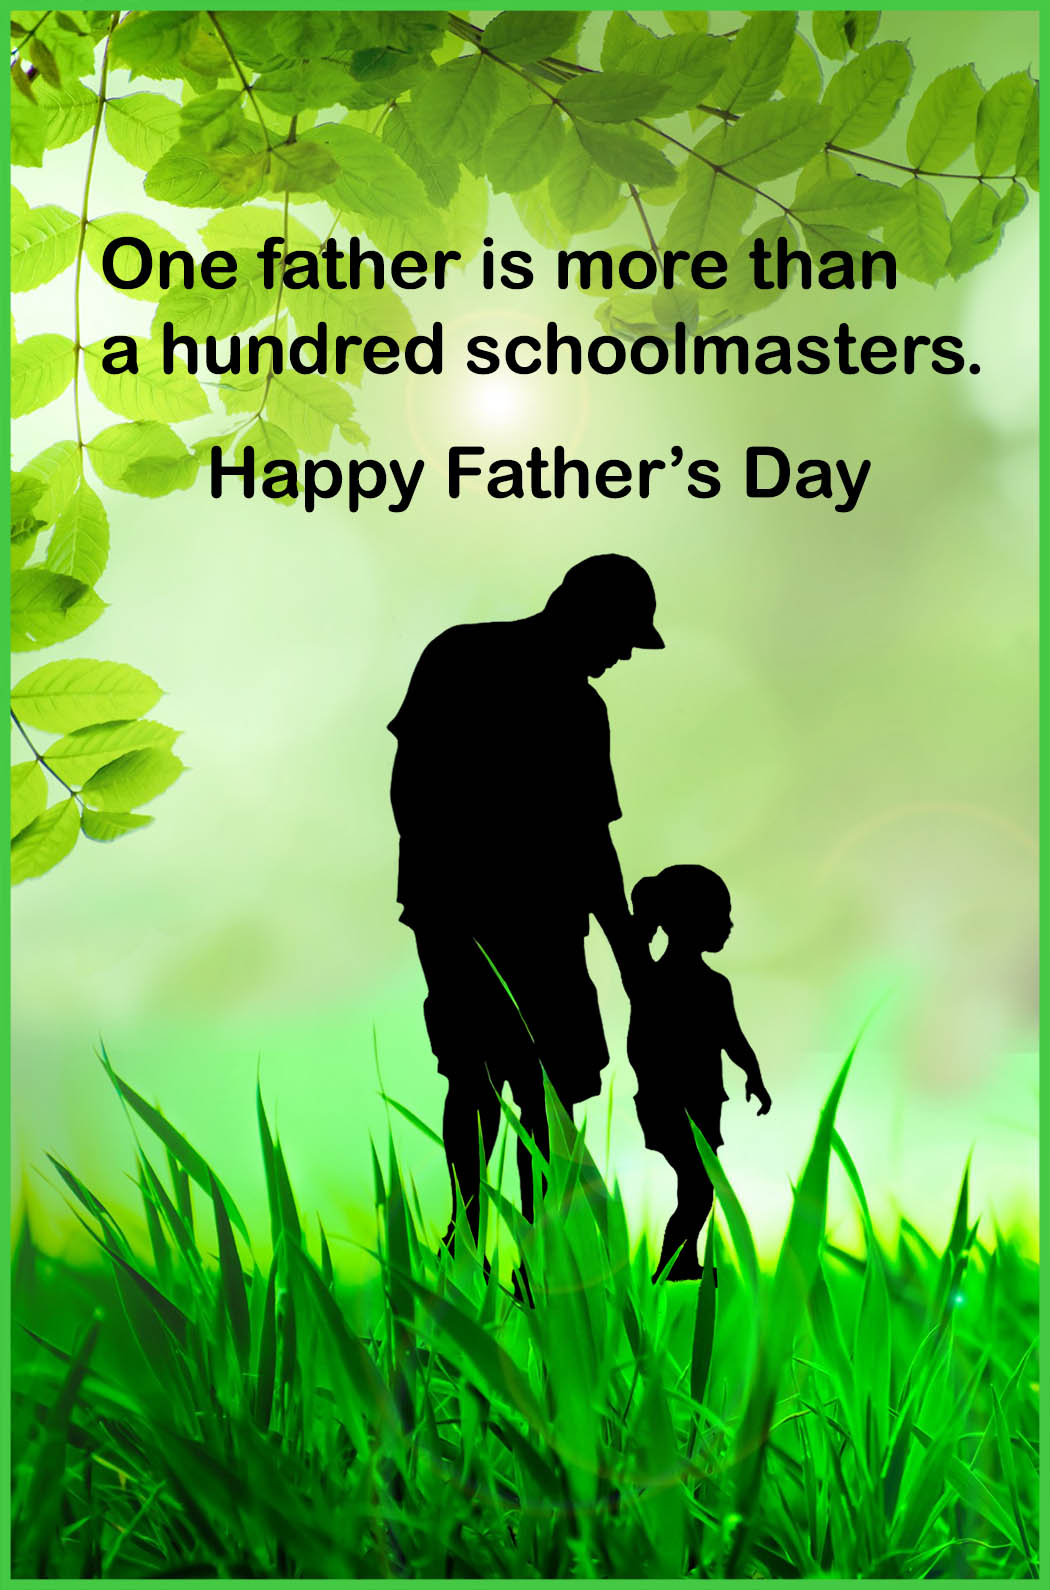 Download 12 Free Father's Day Greeting Cards